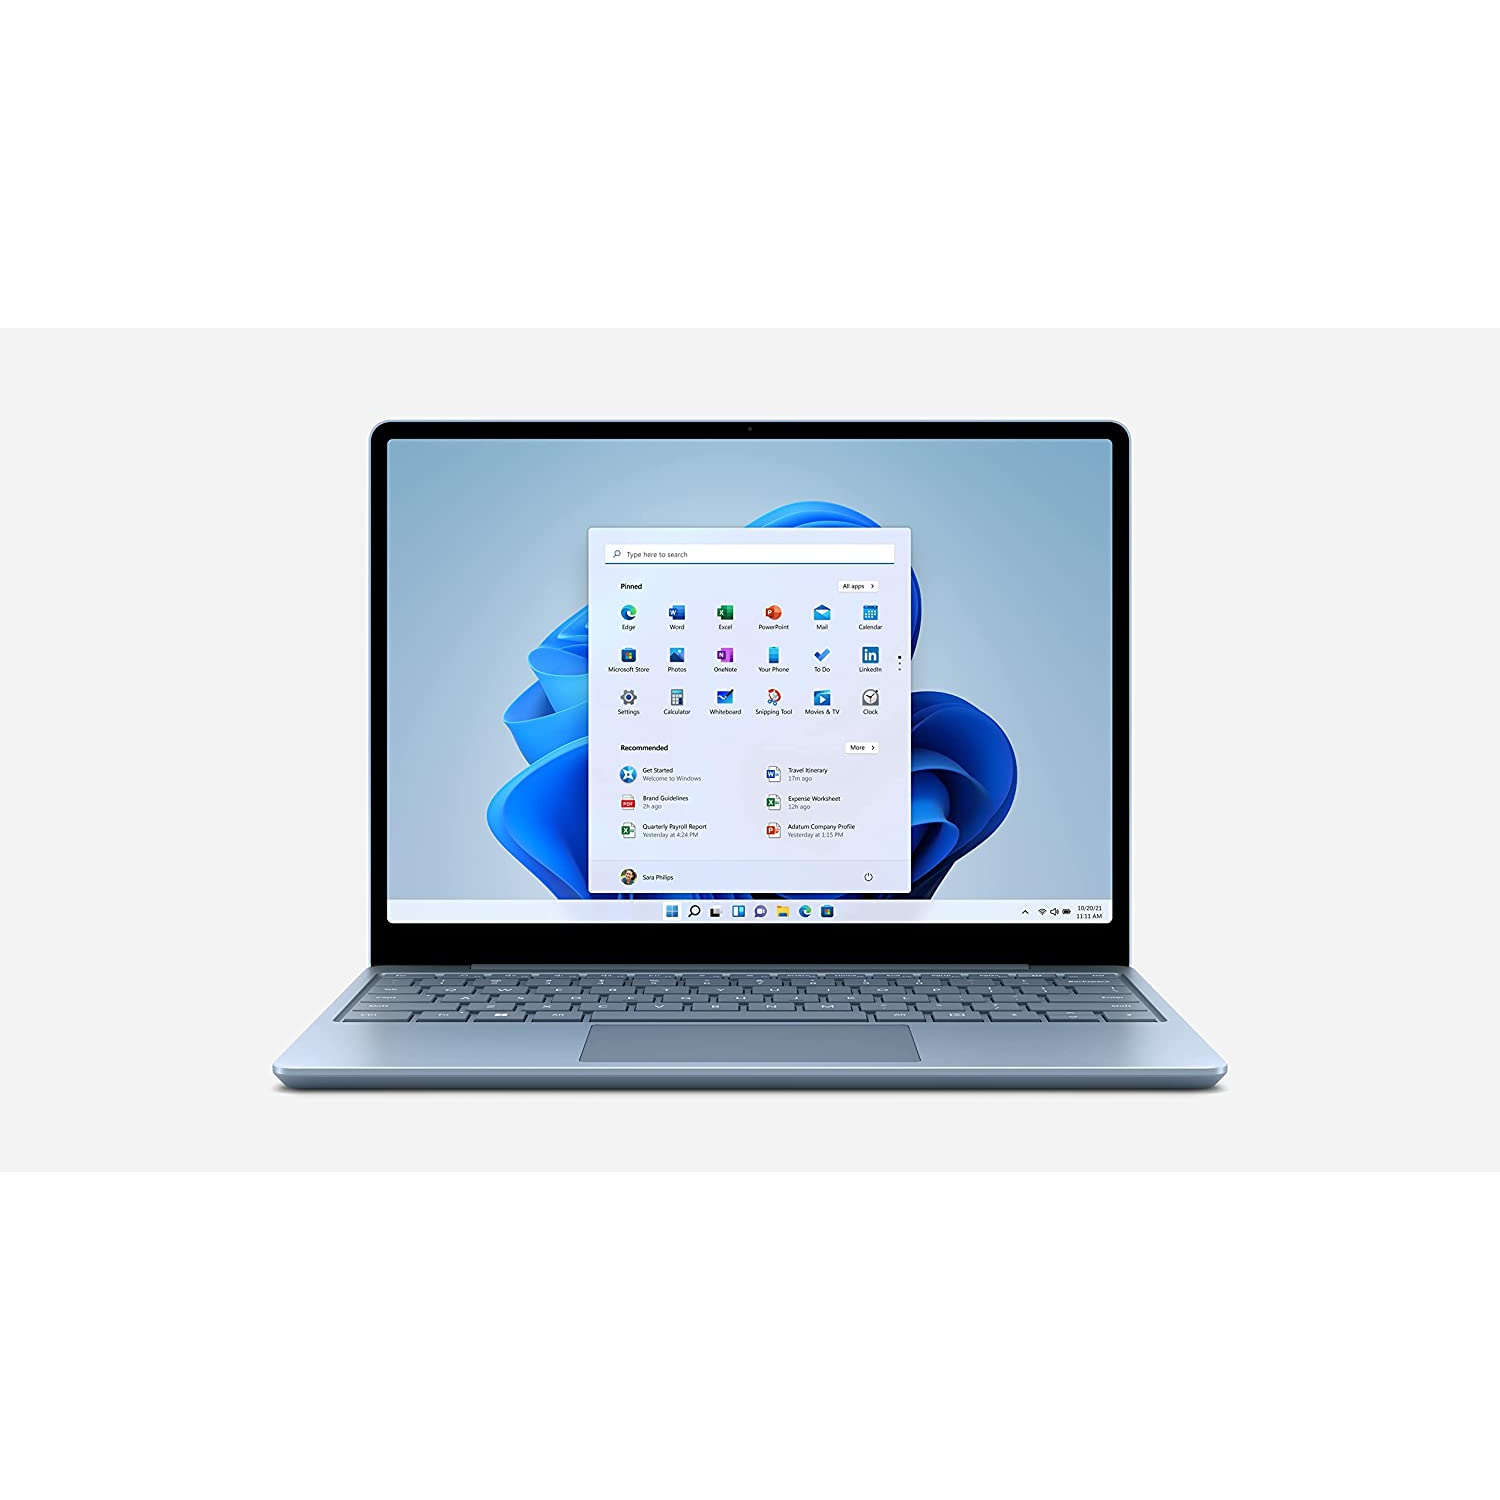 Refurbished (Excellent) - Microsoft Surface Laptop Go 12.4" Multi-Touch - Intel Core i5, 8GB RAM, 128GB SSD, Windows 10 Home in S Mode - Blue - Certified Refurbished